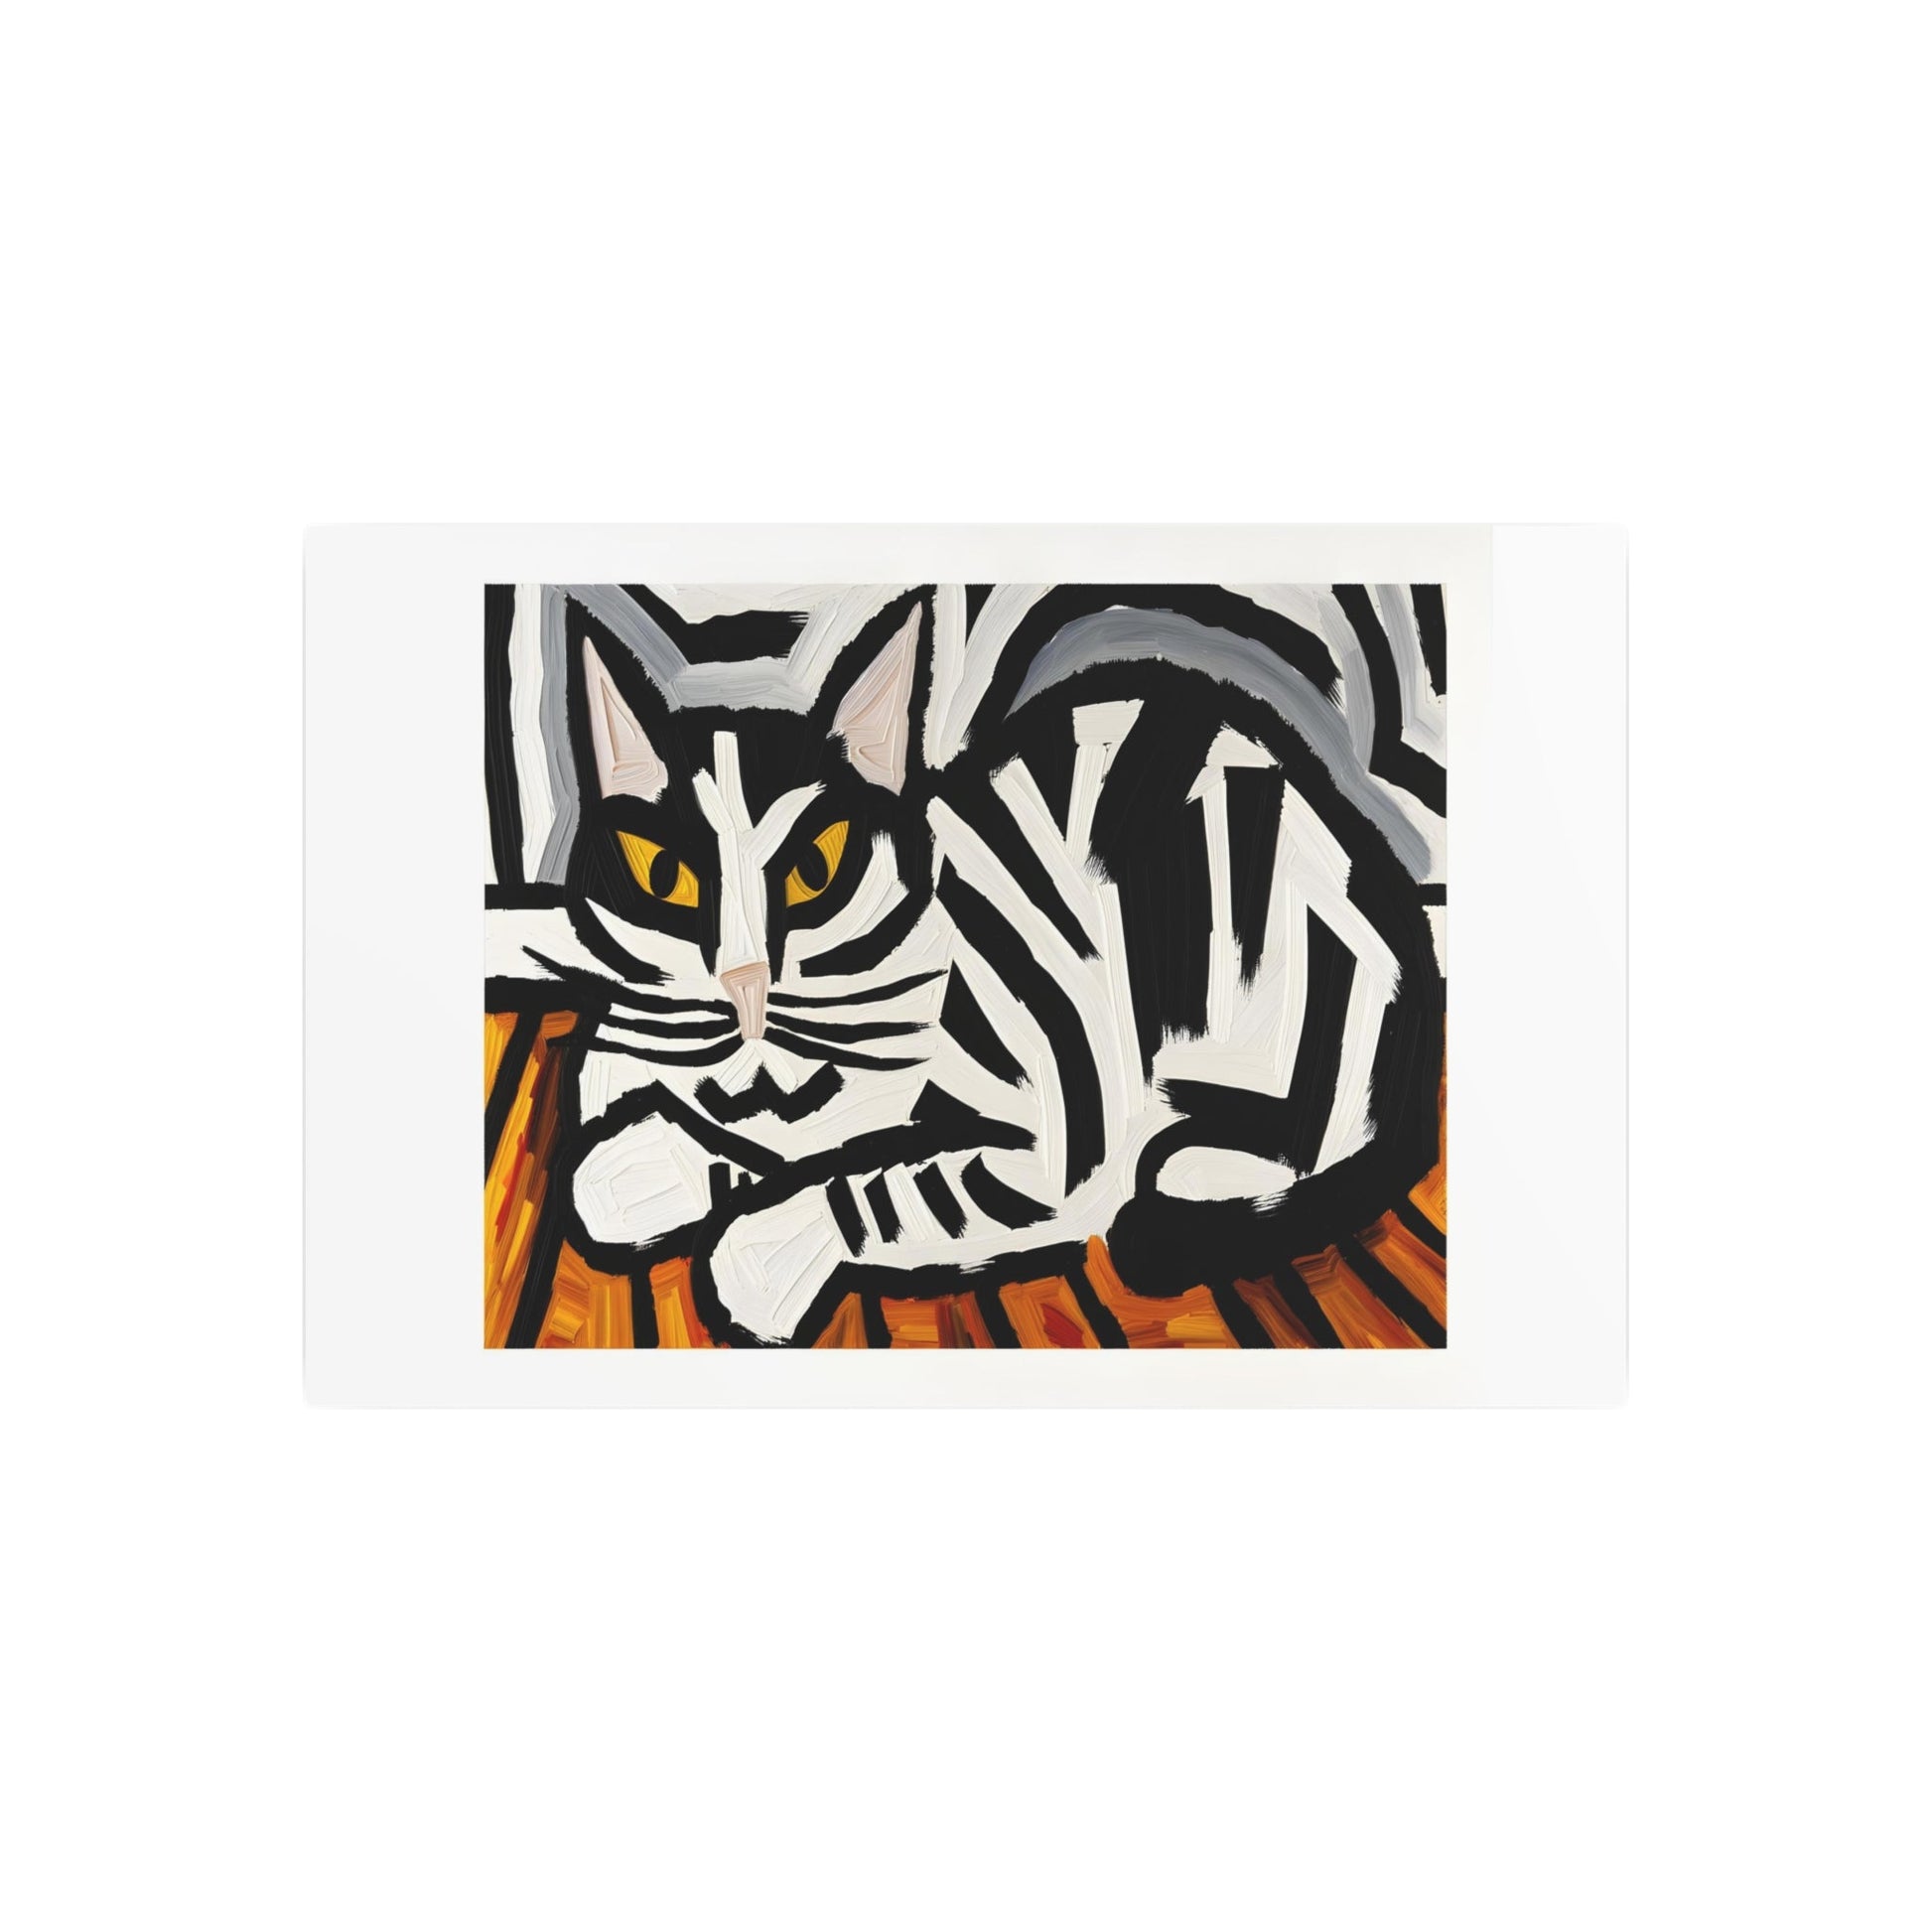 Metal Poster Art | "Expressionist Western Art Style: Emotional Black & White Striped Cat in Bold Distorted Shapes - Abstract Expressionism Artwork" - Metal Poster Art 36″ x 24″ (Horizontal) 0.12''